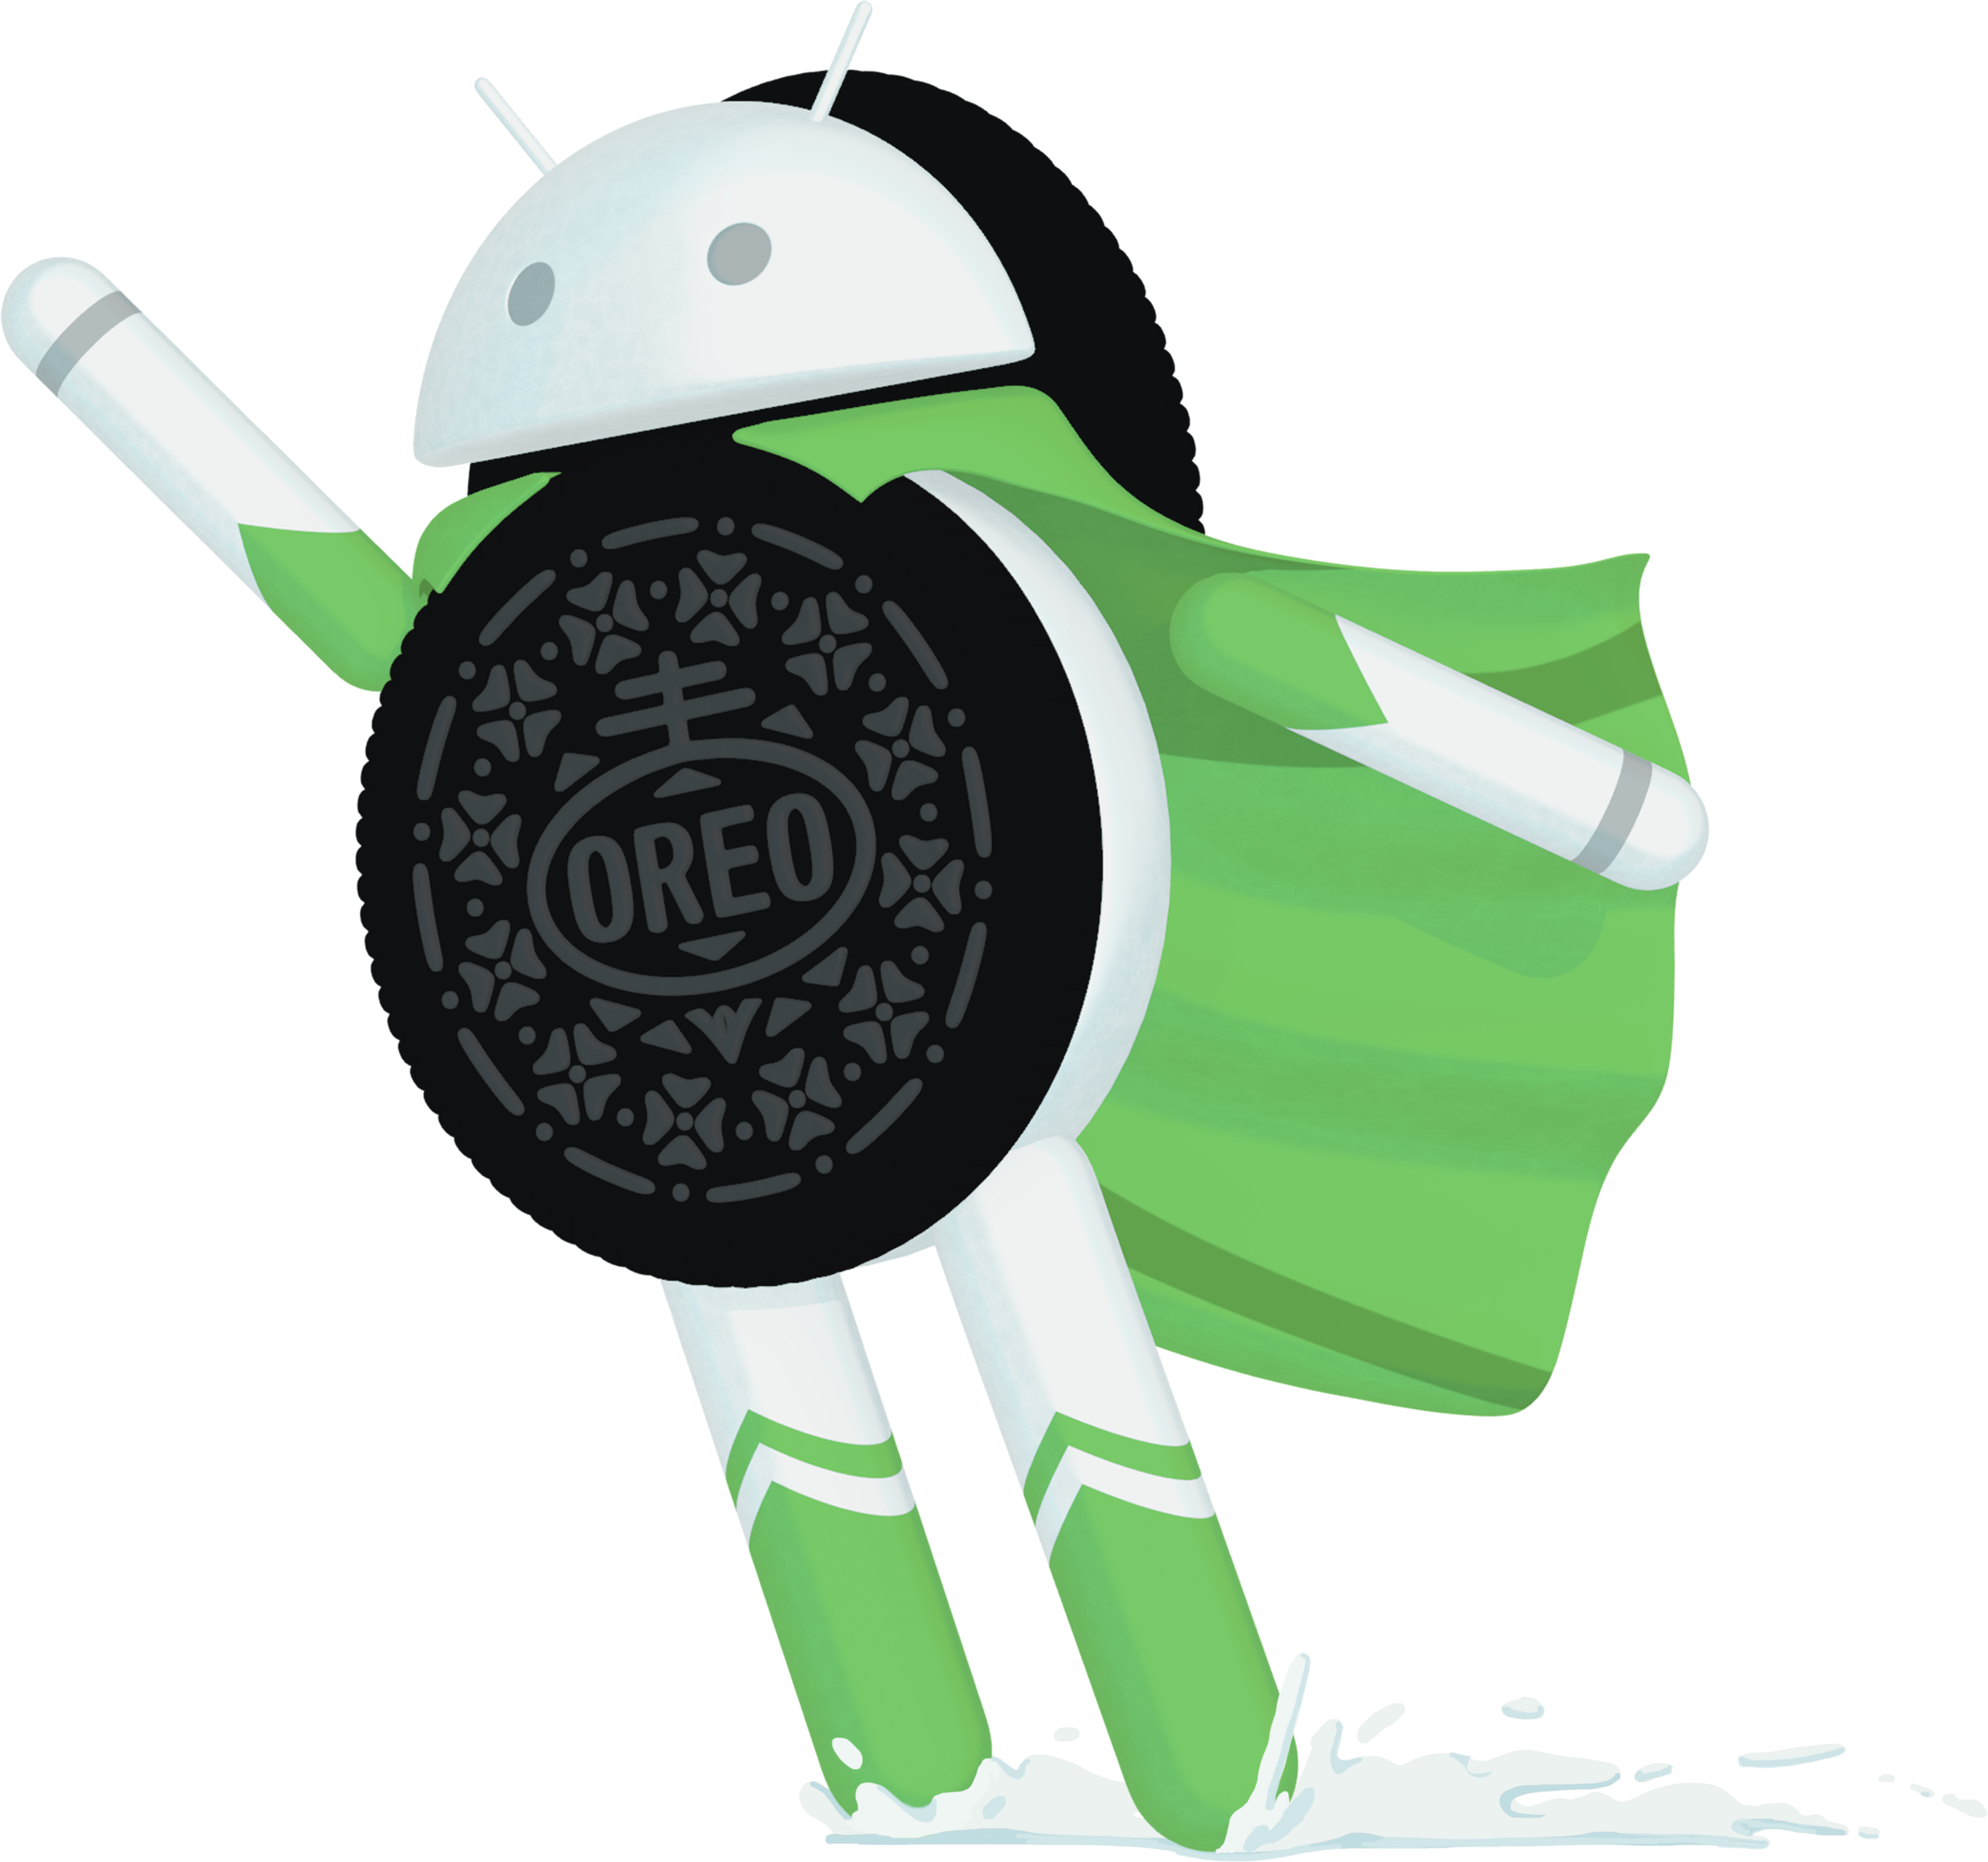 Google tailors pie to. Oreo clipart android